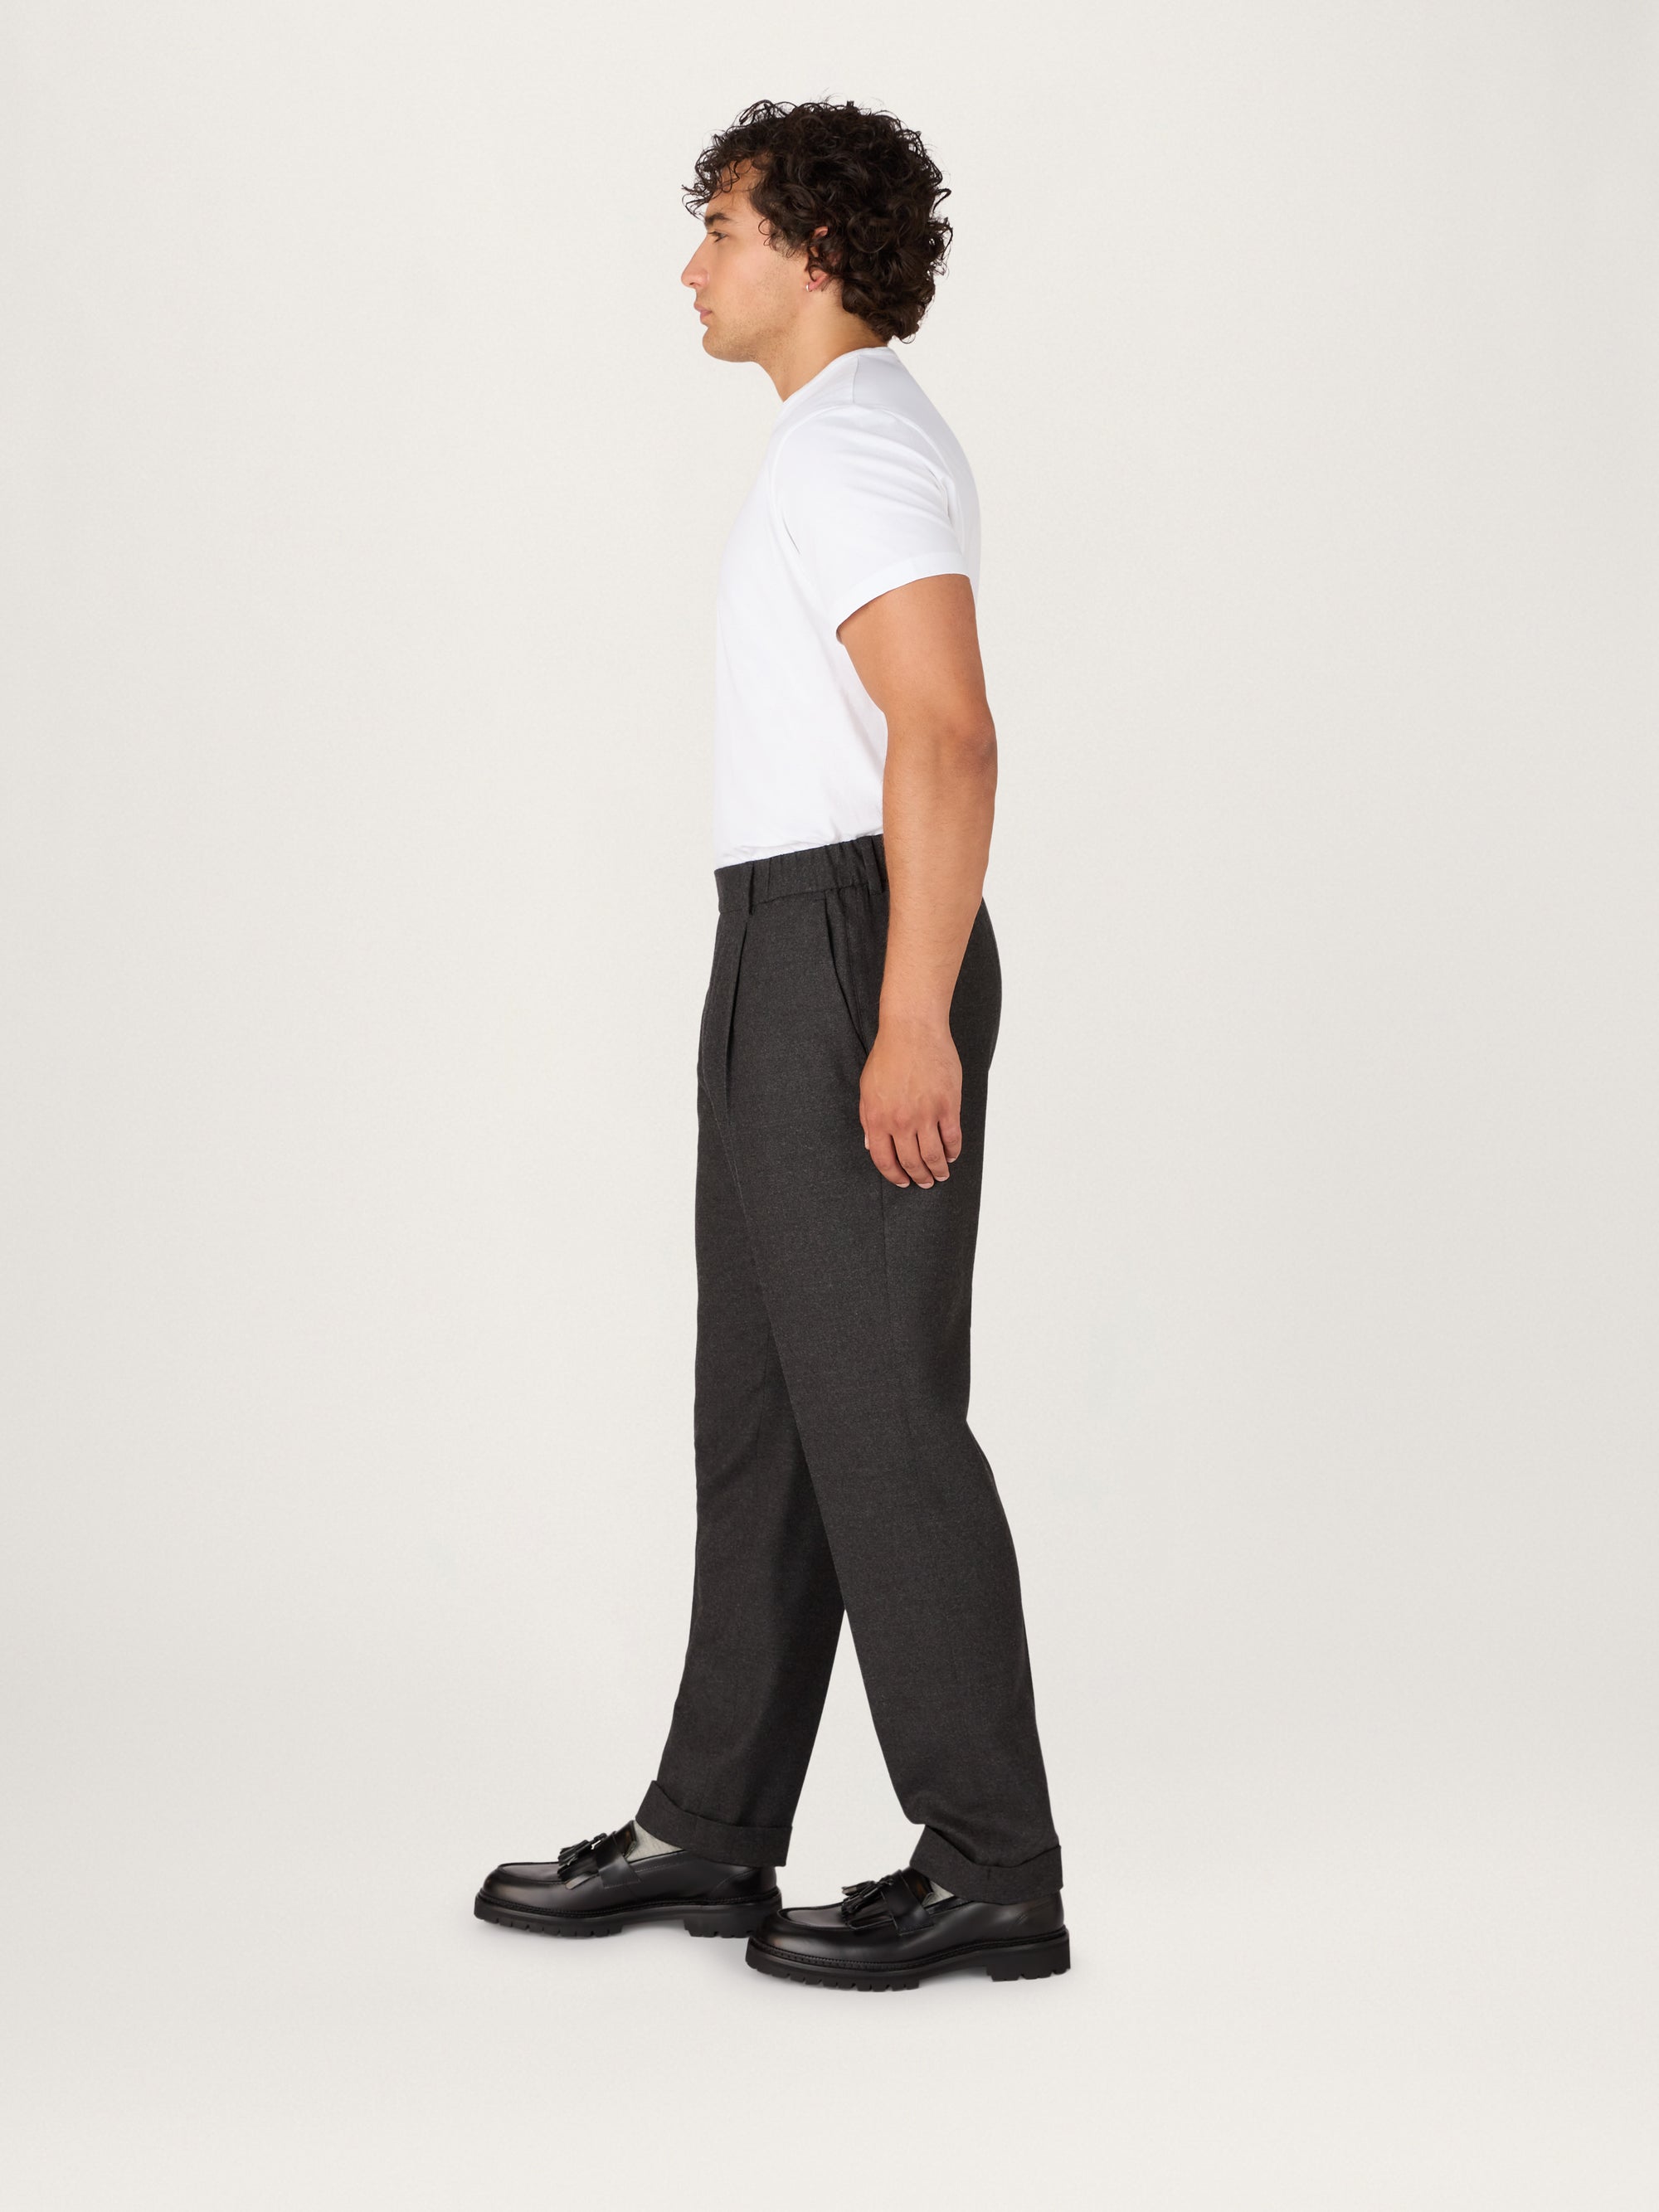 Men's Year-Round Wool Trousers, Hidden Comfort Pleated